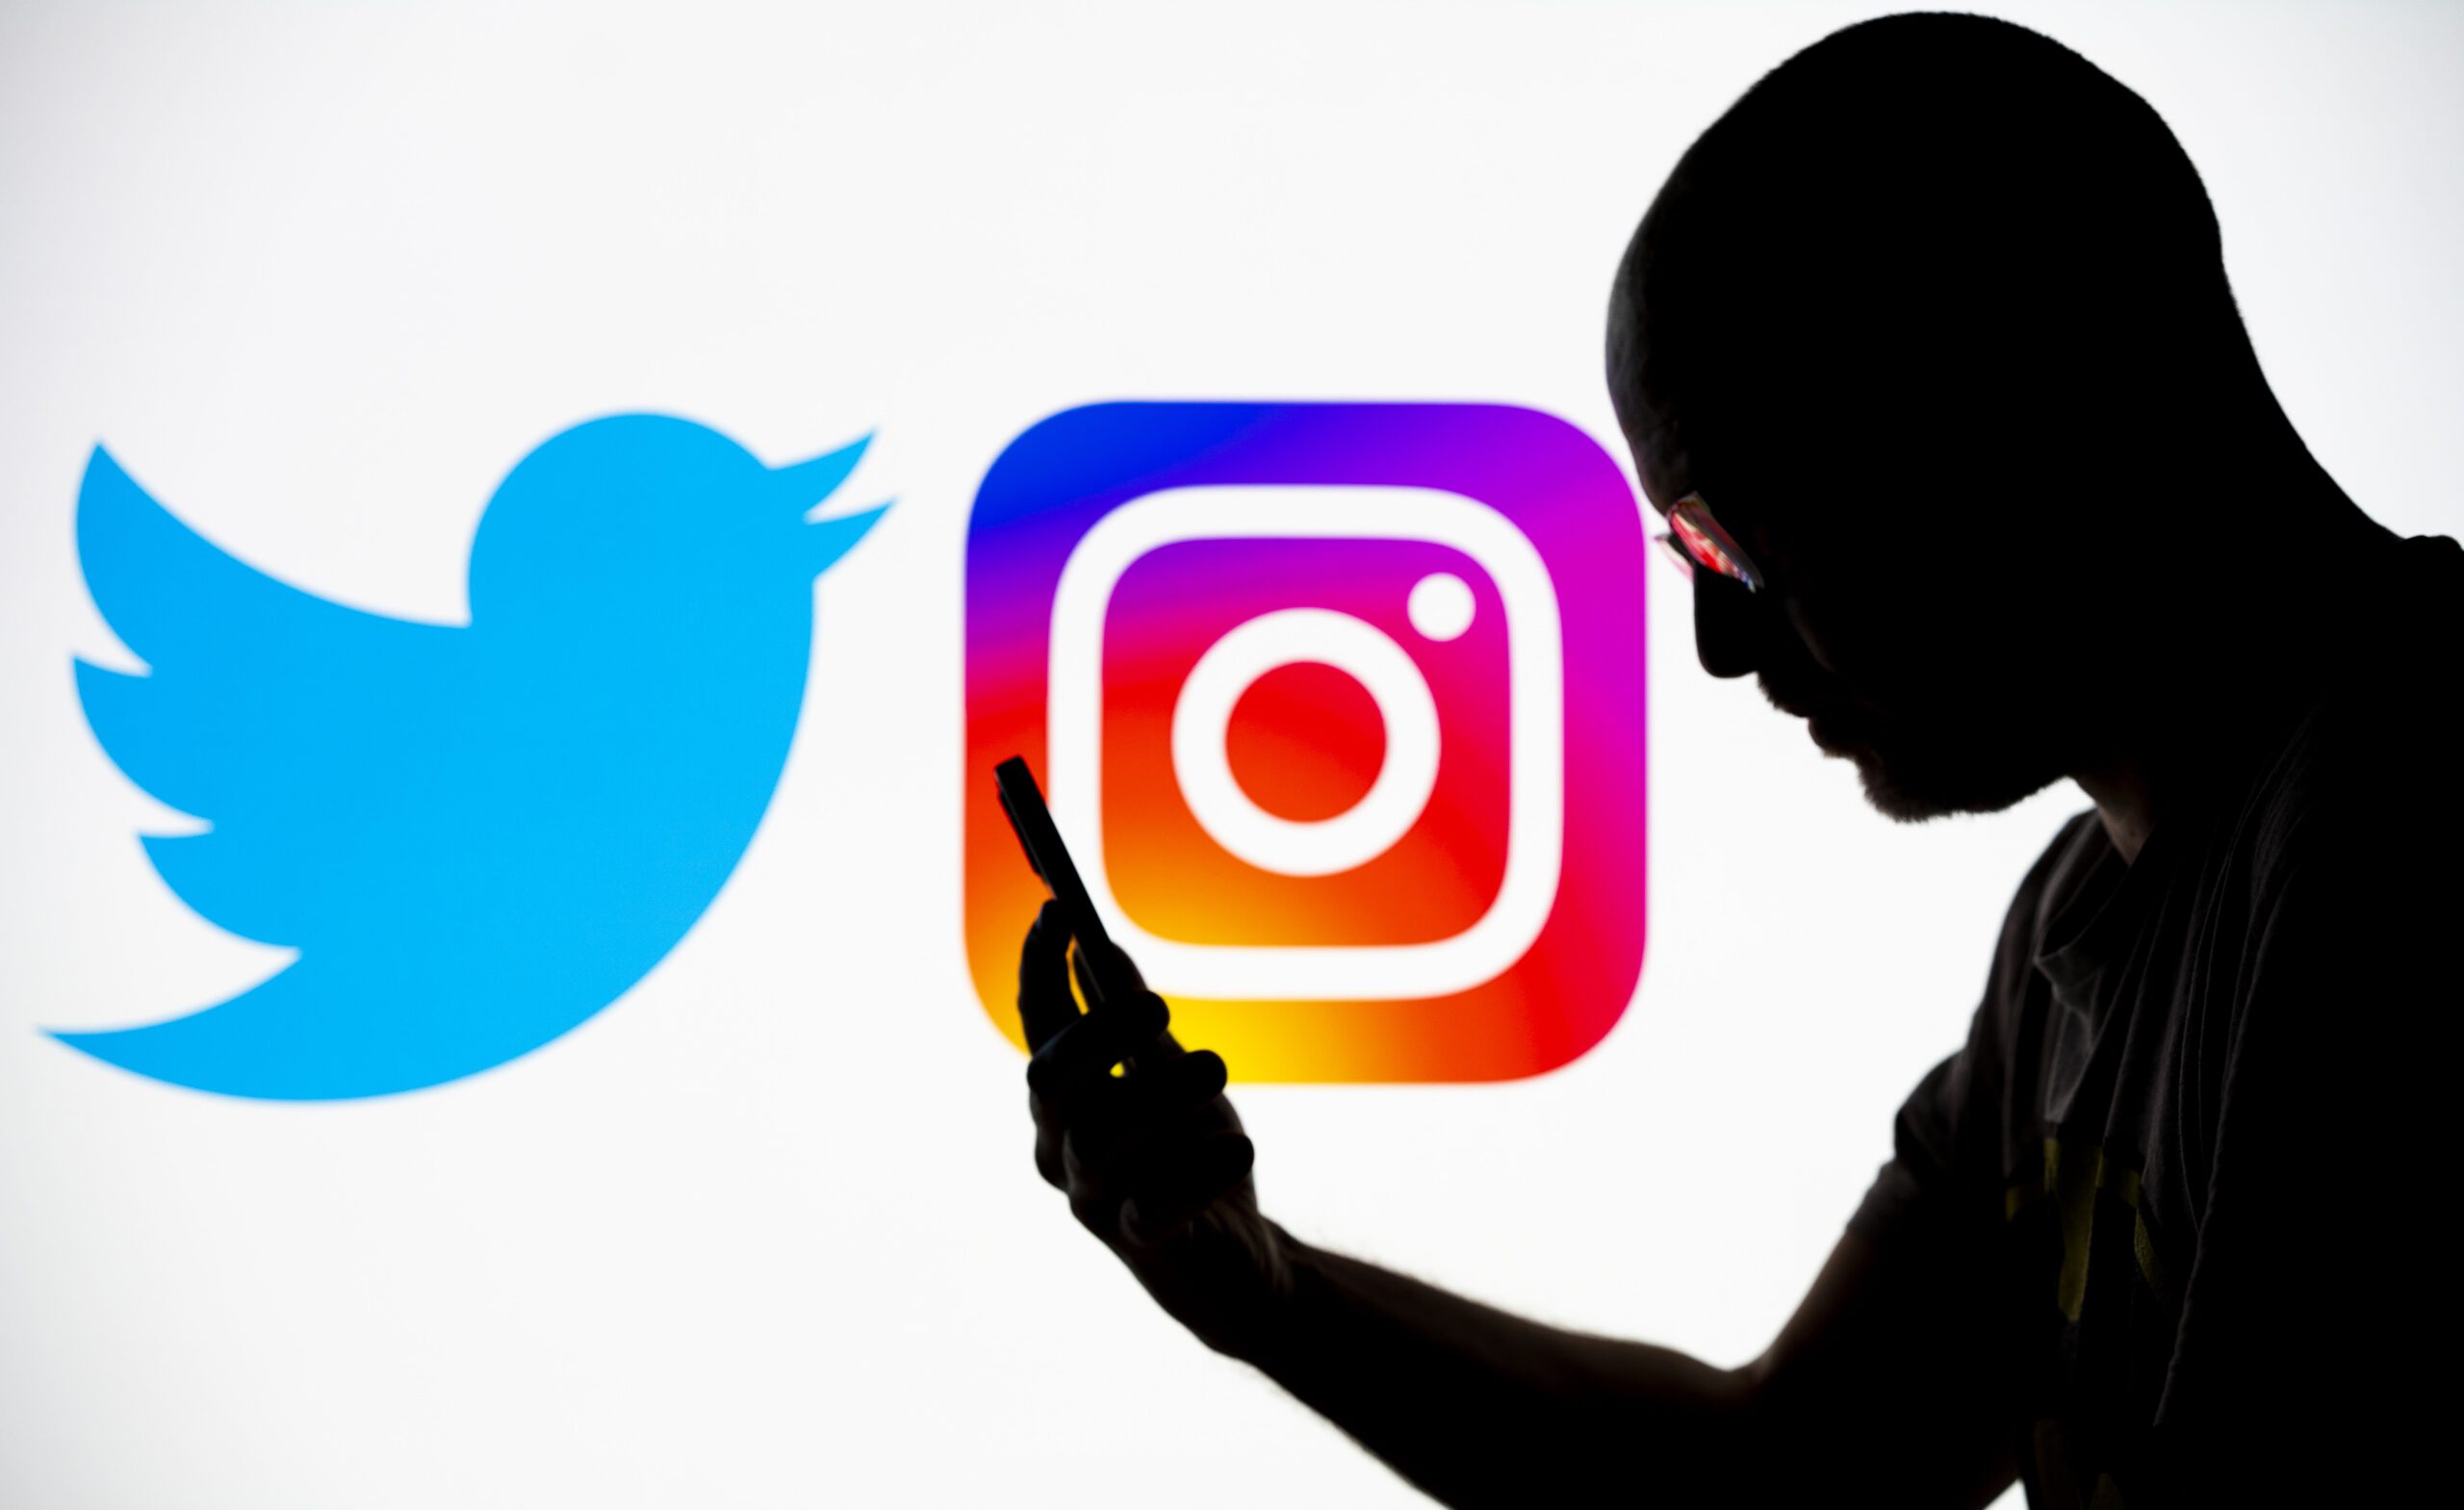 A figure looks at a phone in silhouette, with the Twitter and Instagram logos displayed in the background.